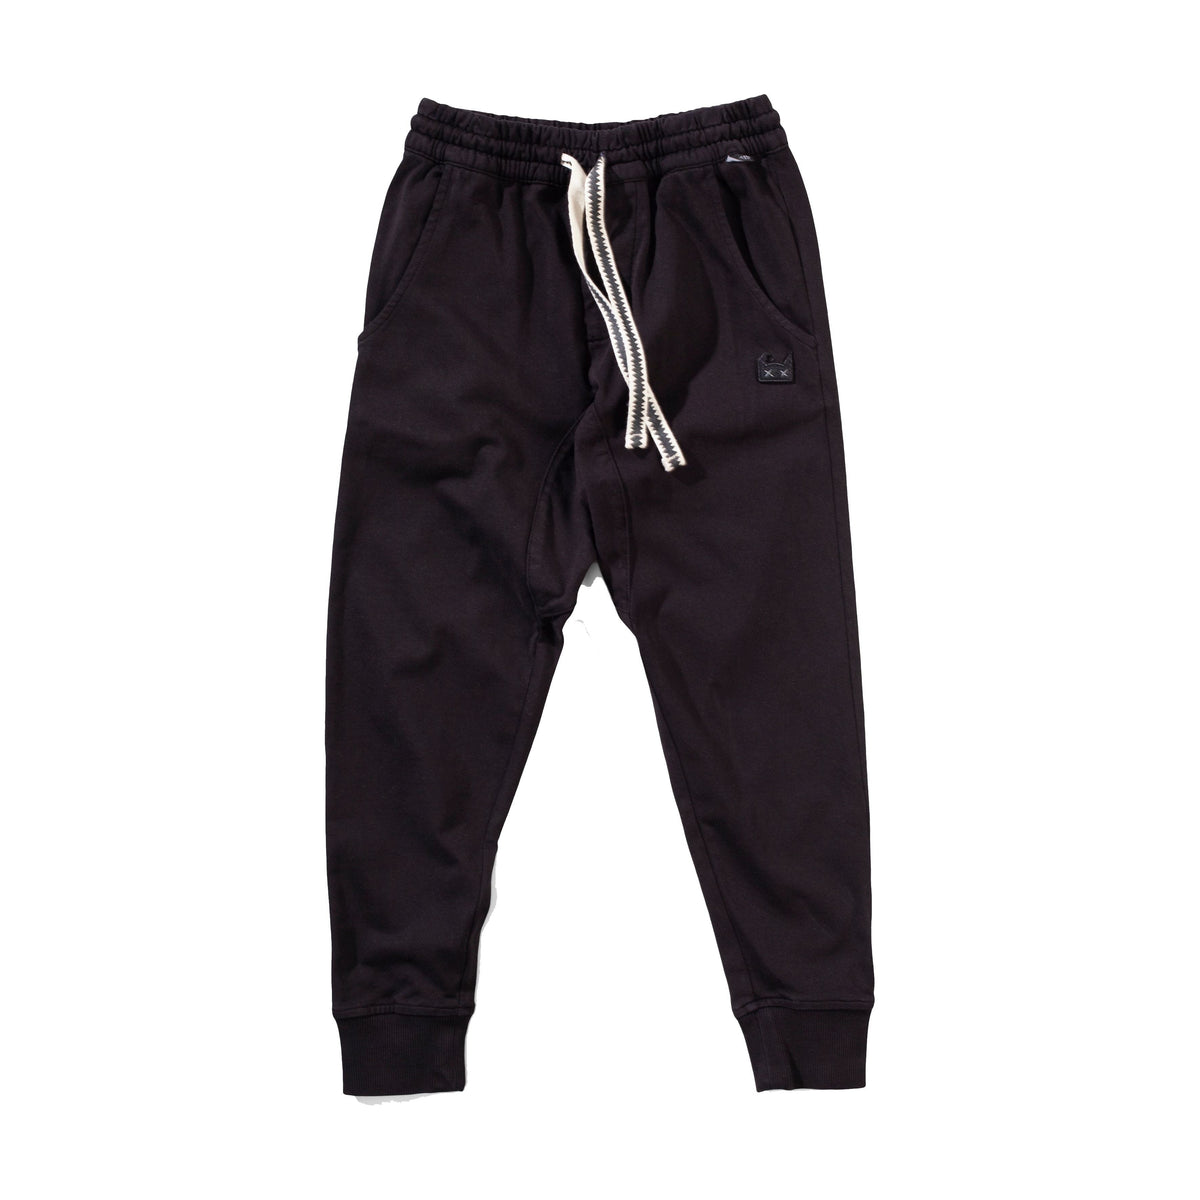 Tracker Rugby Pant - Washed Black